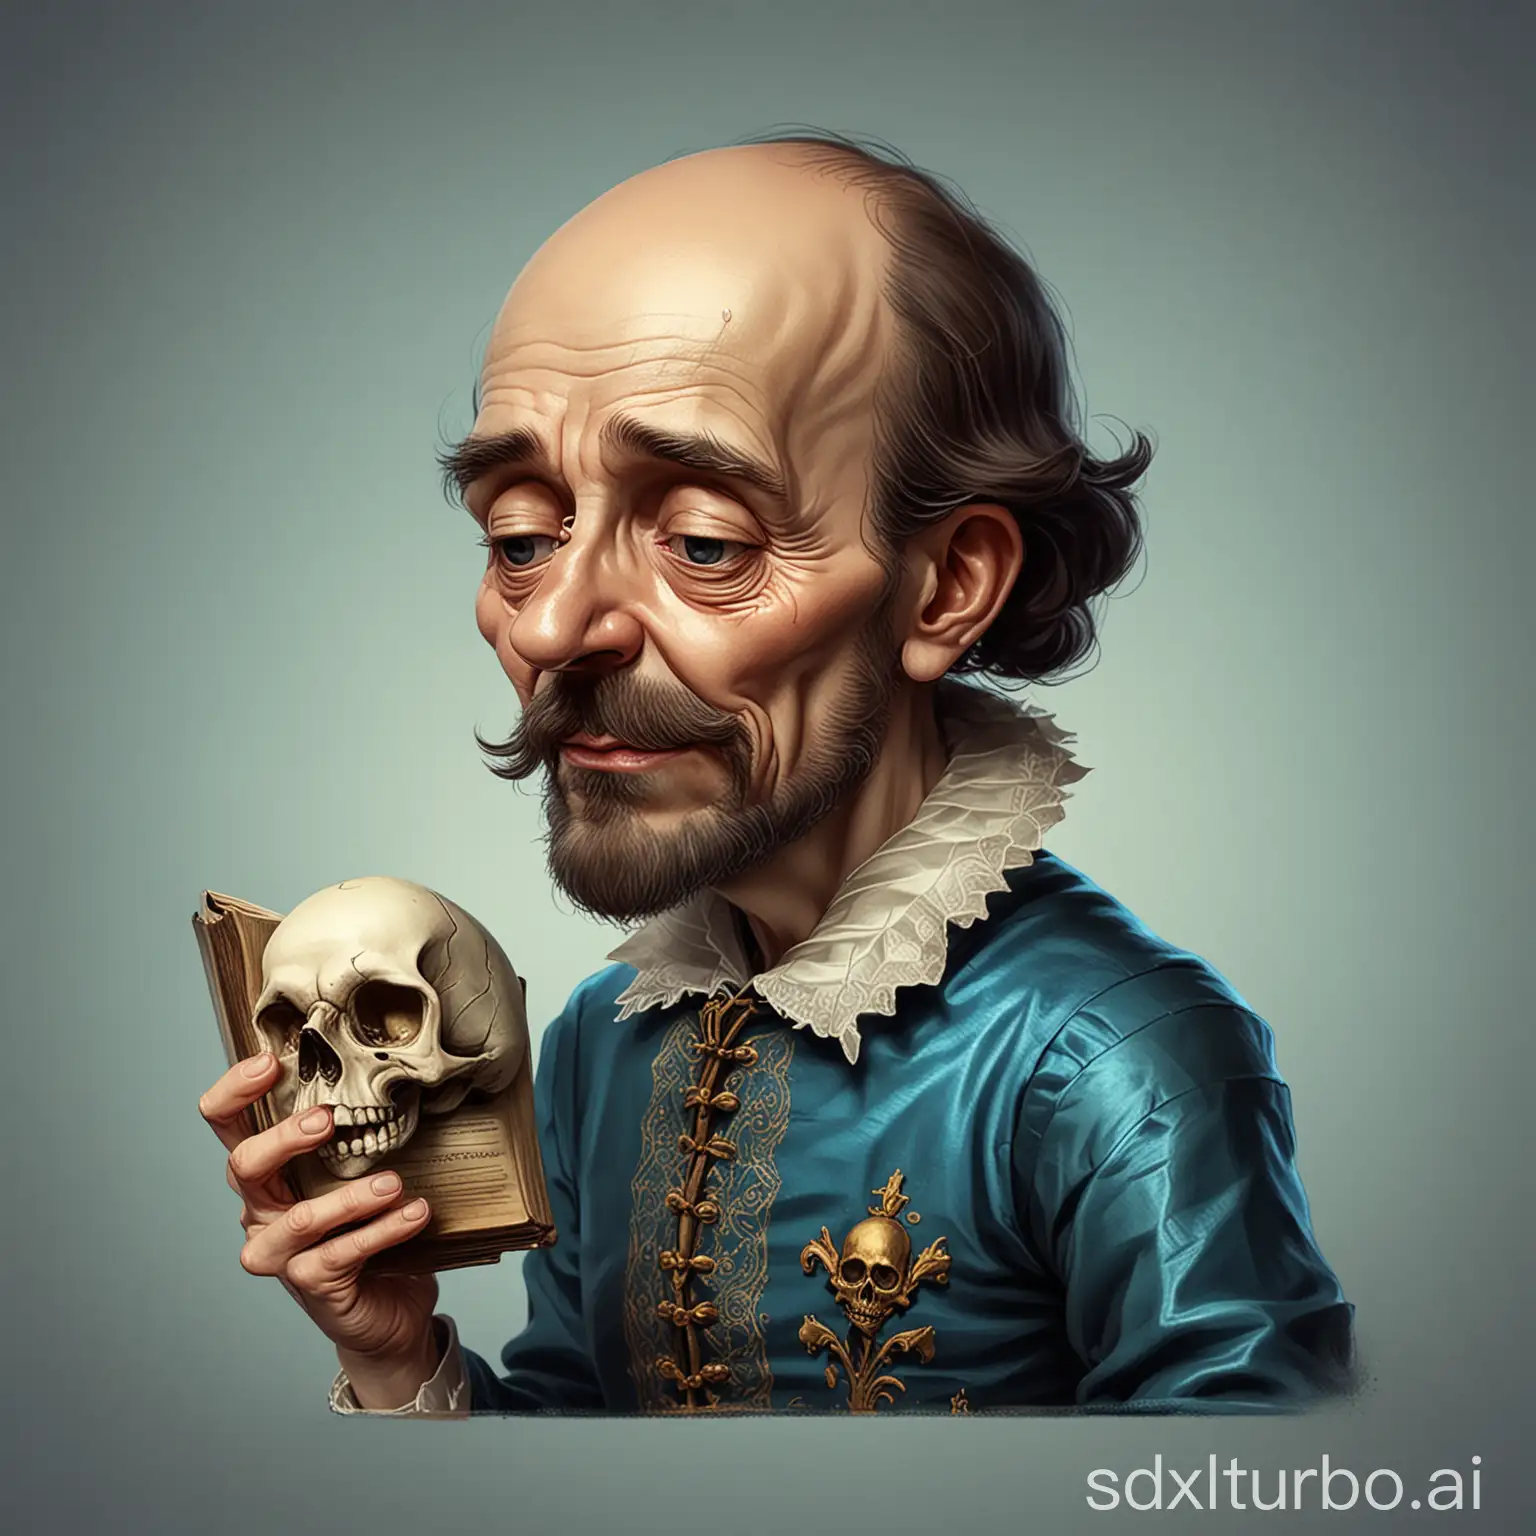 Caricature of William Shakespeare holding a book and skull in the style of cartoonish caricatures, with blue, dark white and light amber colors, featuring simple, colorful illustrations in a high resolution image, he's upset, he's crying